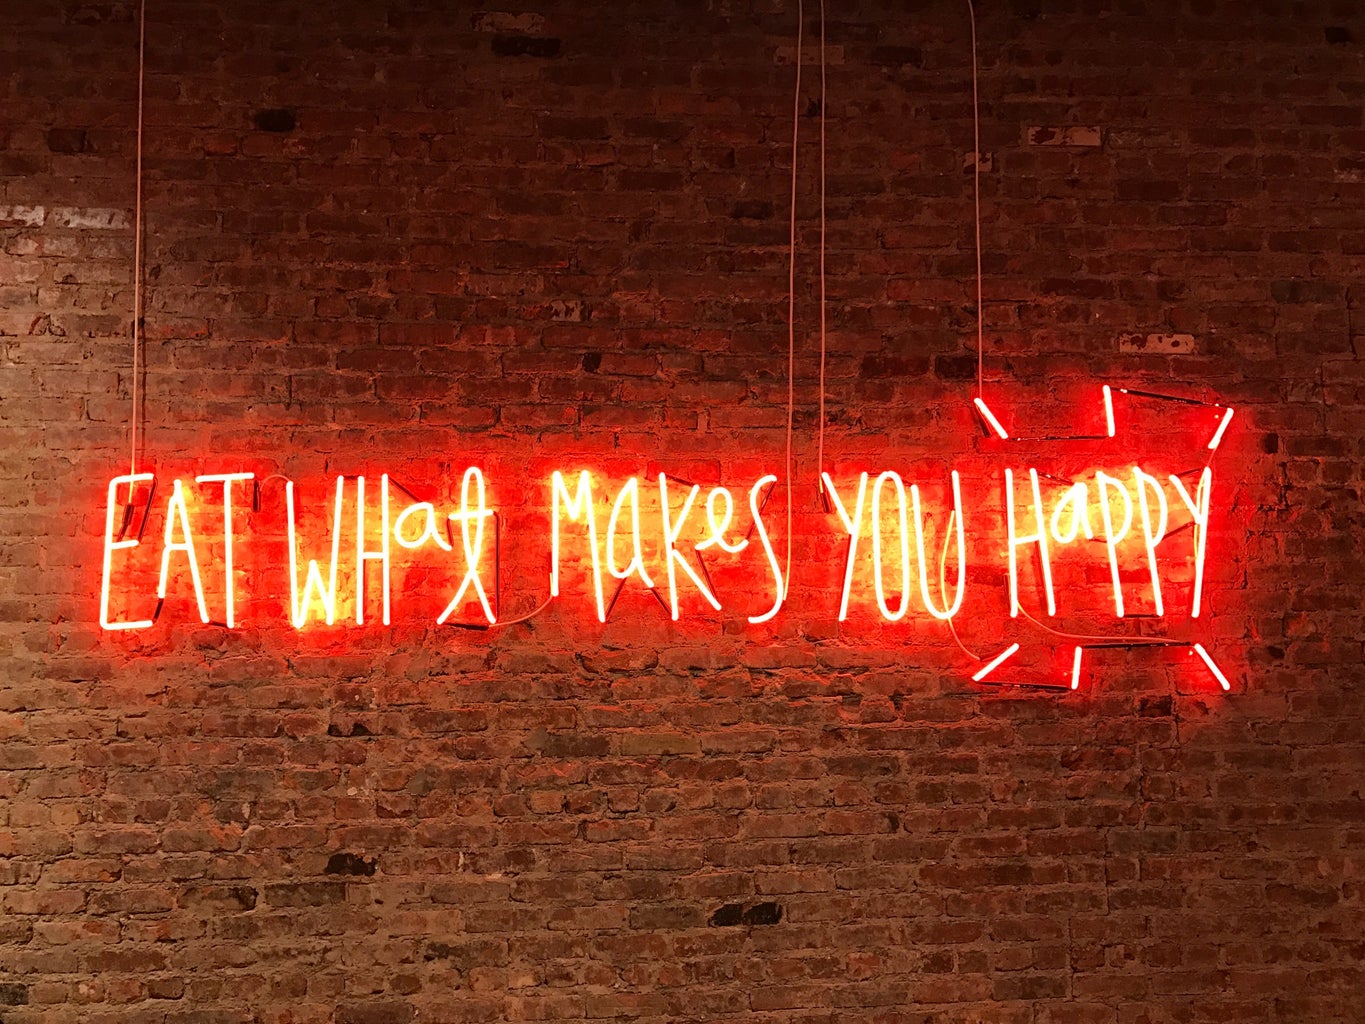 eat what makes you happy neon sign on brick wall